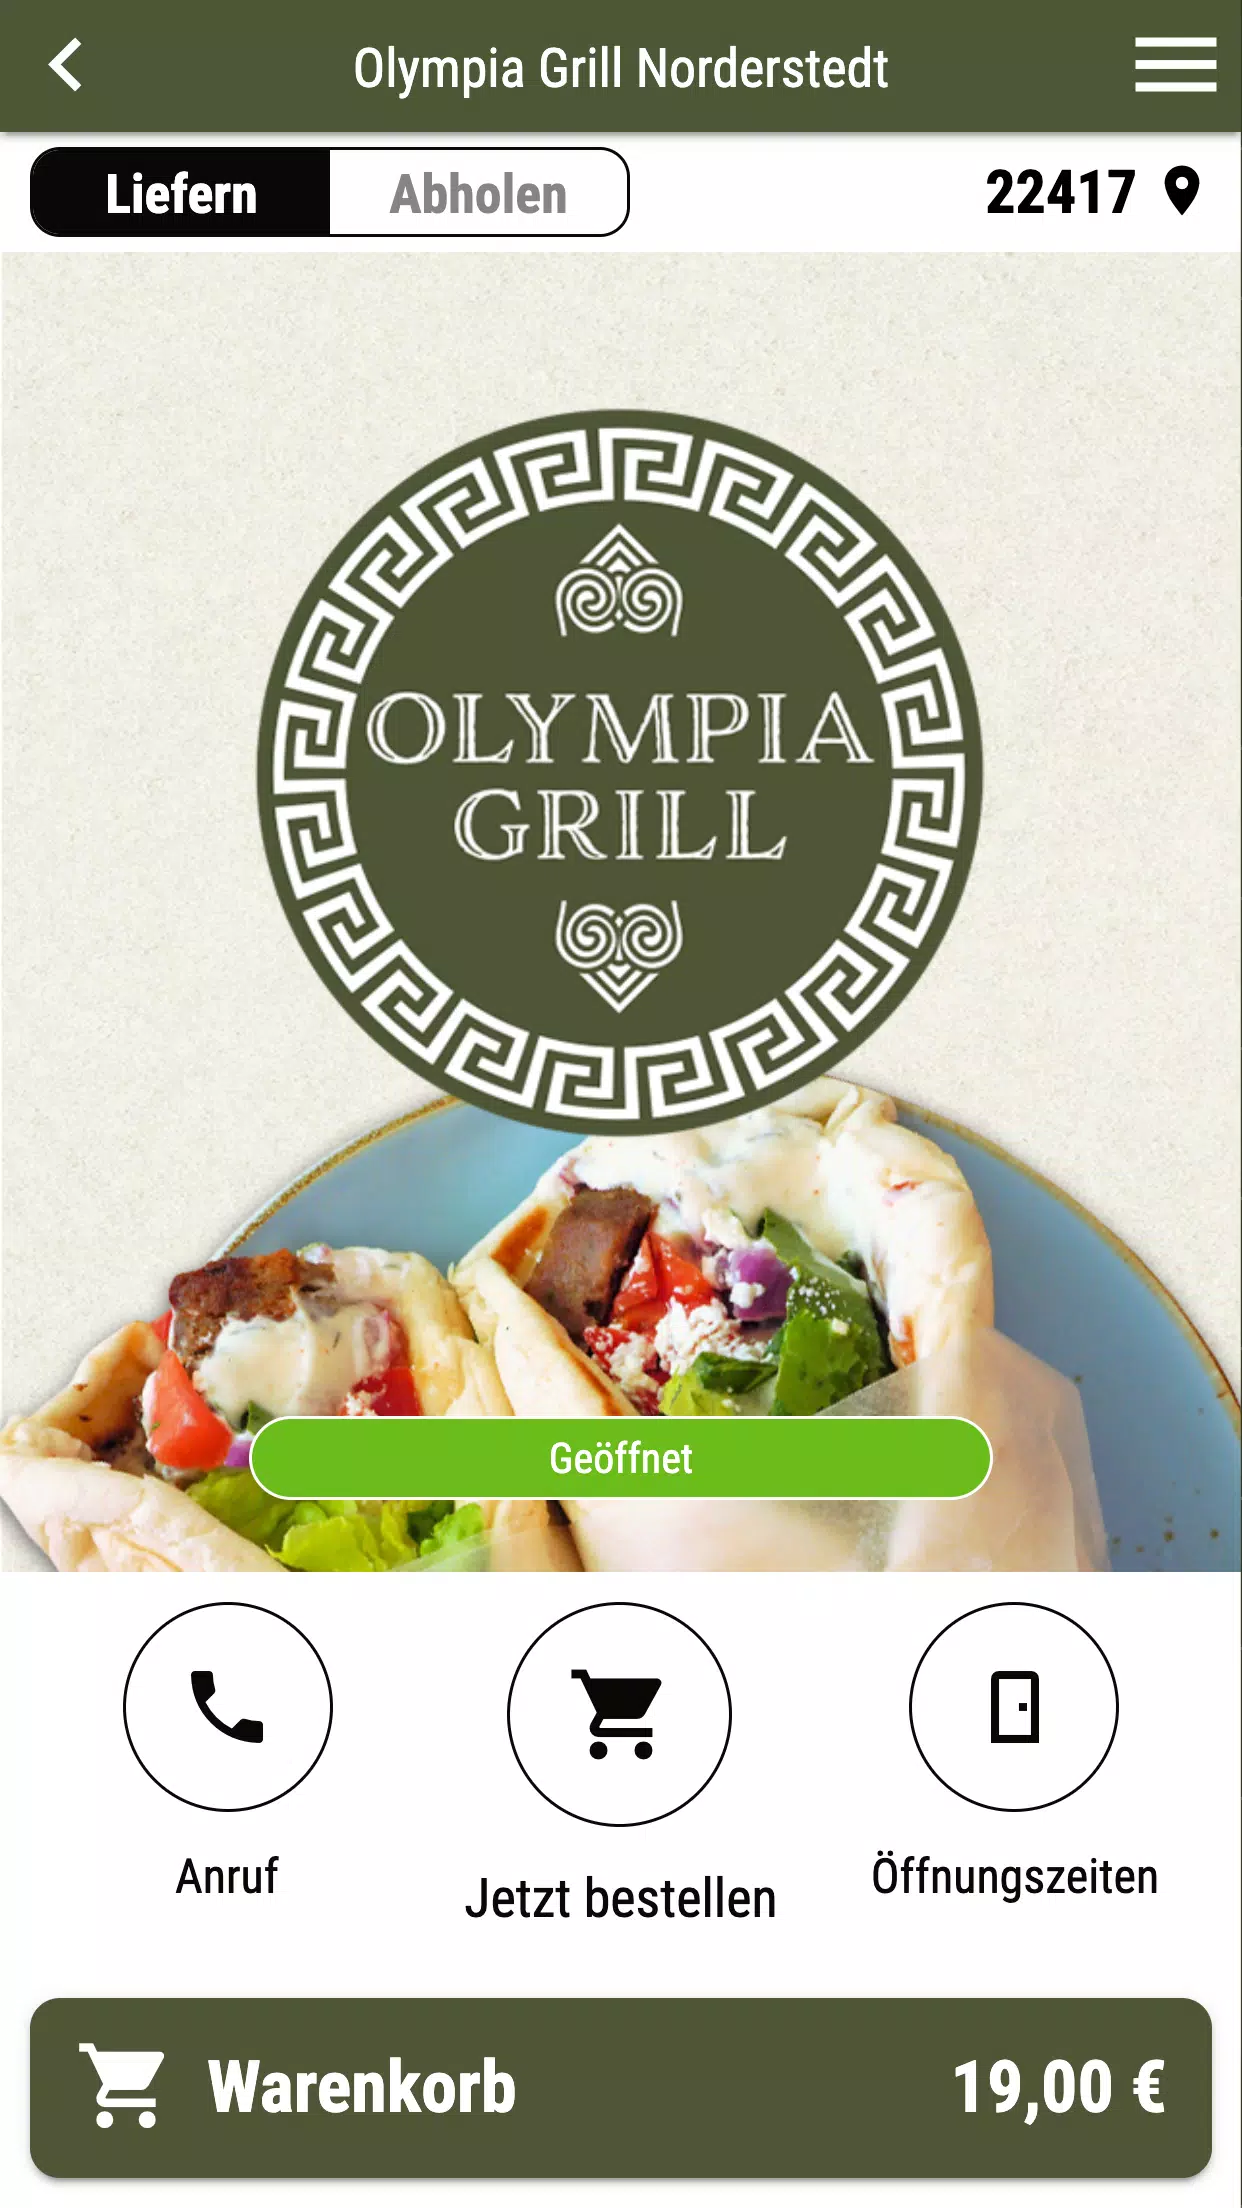 Olympia Grill Norderstedt for Android - APK Download